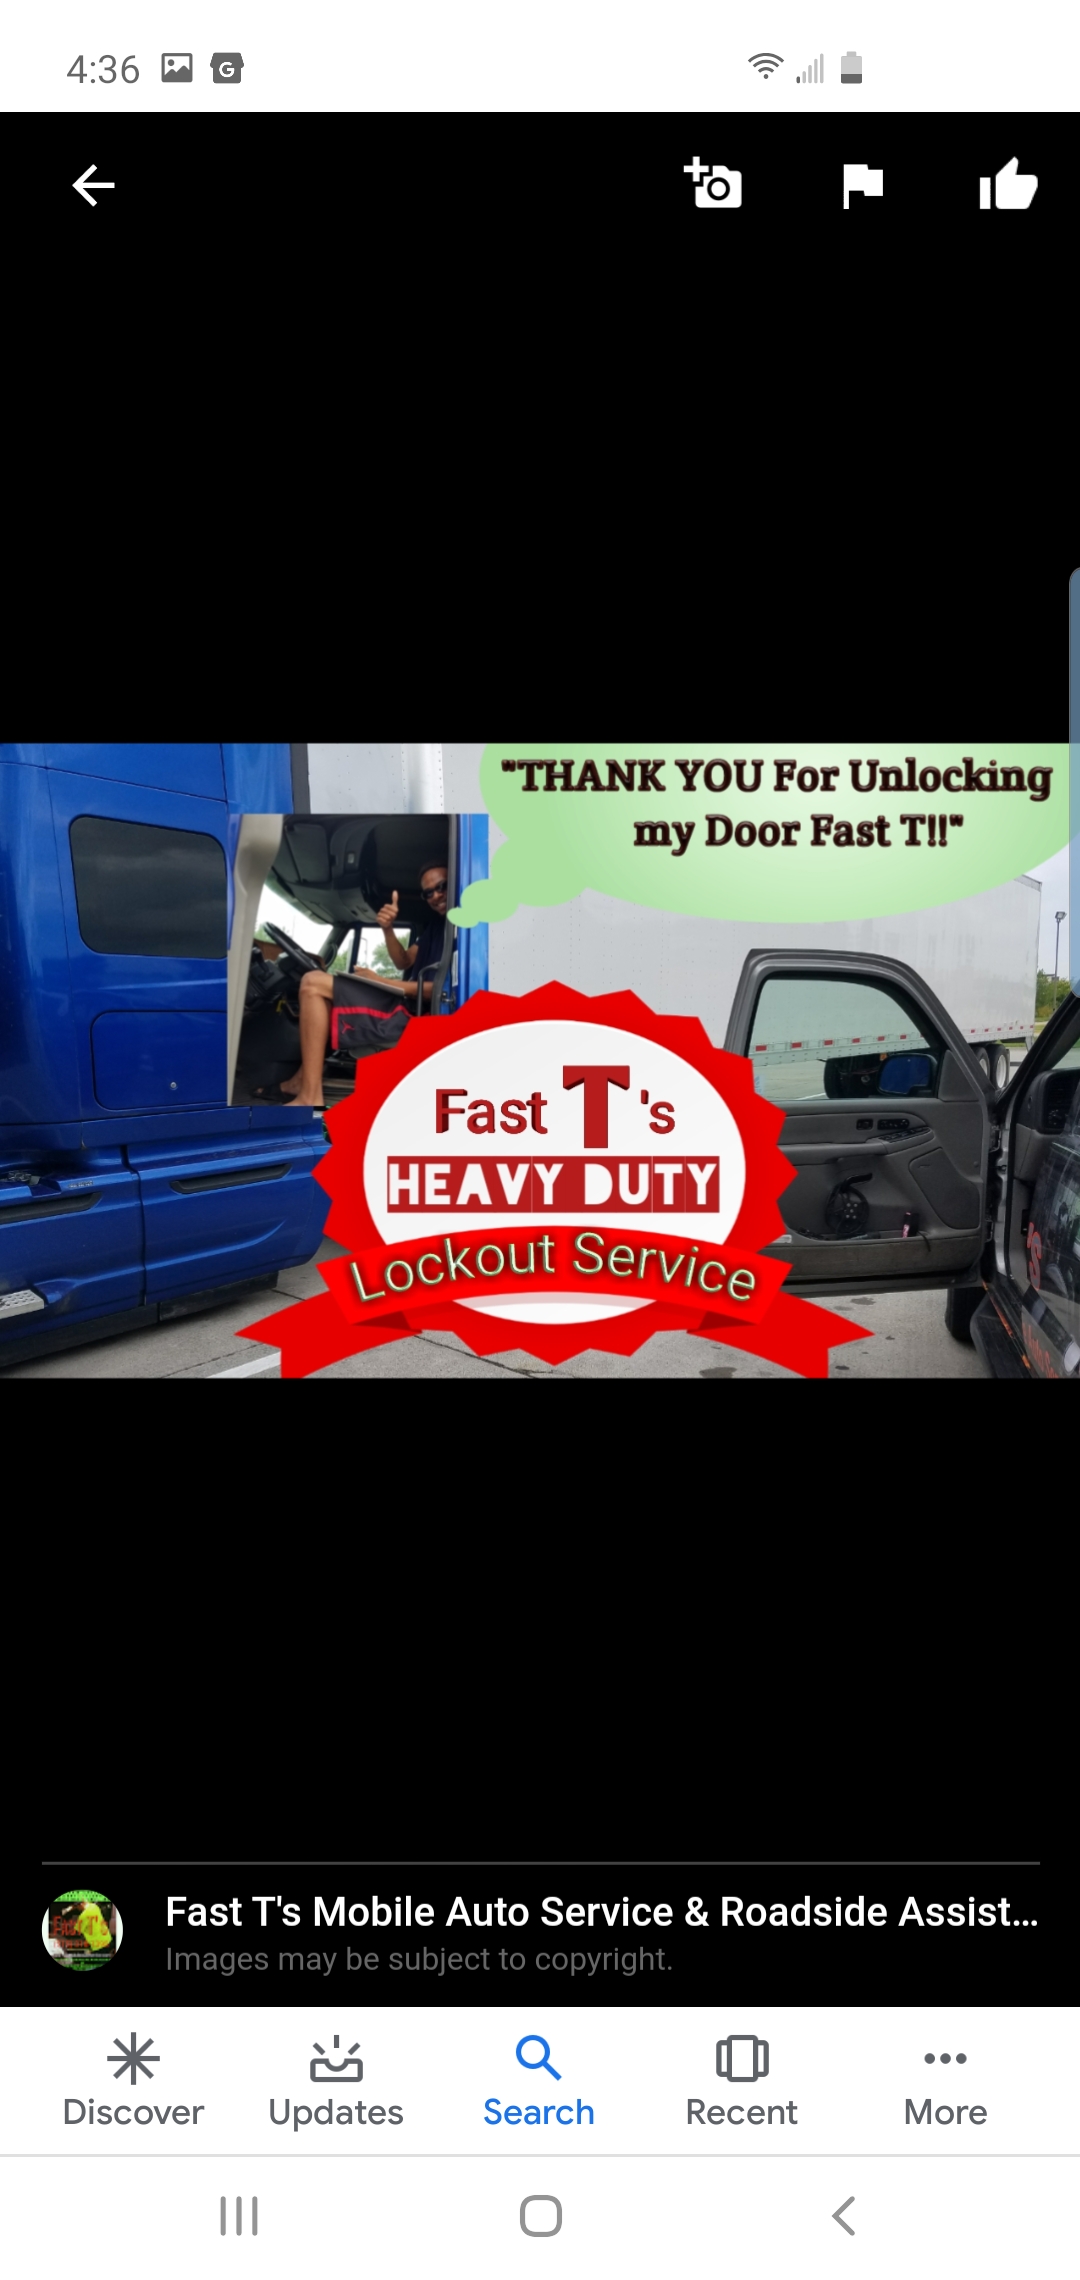 Fast T's Big Rig, car, and truck Lockout Service of Central Iowa